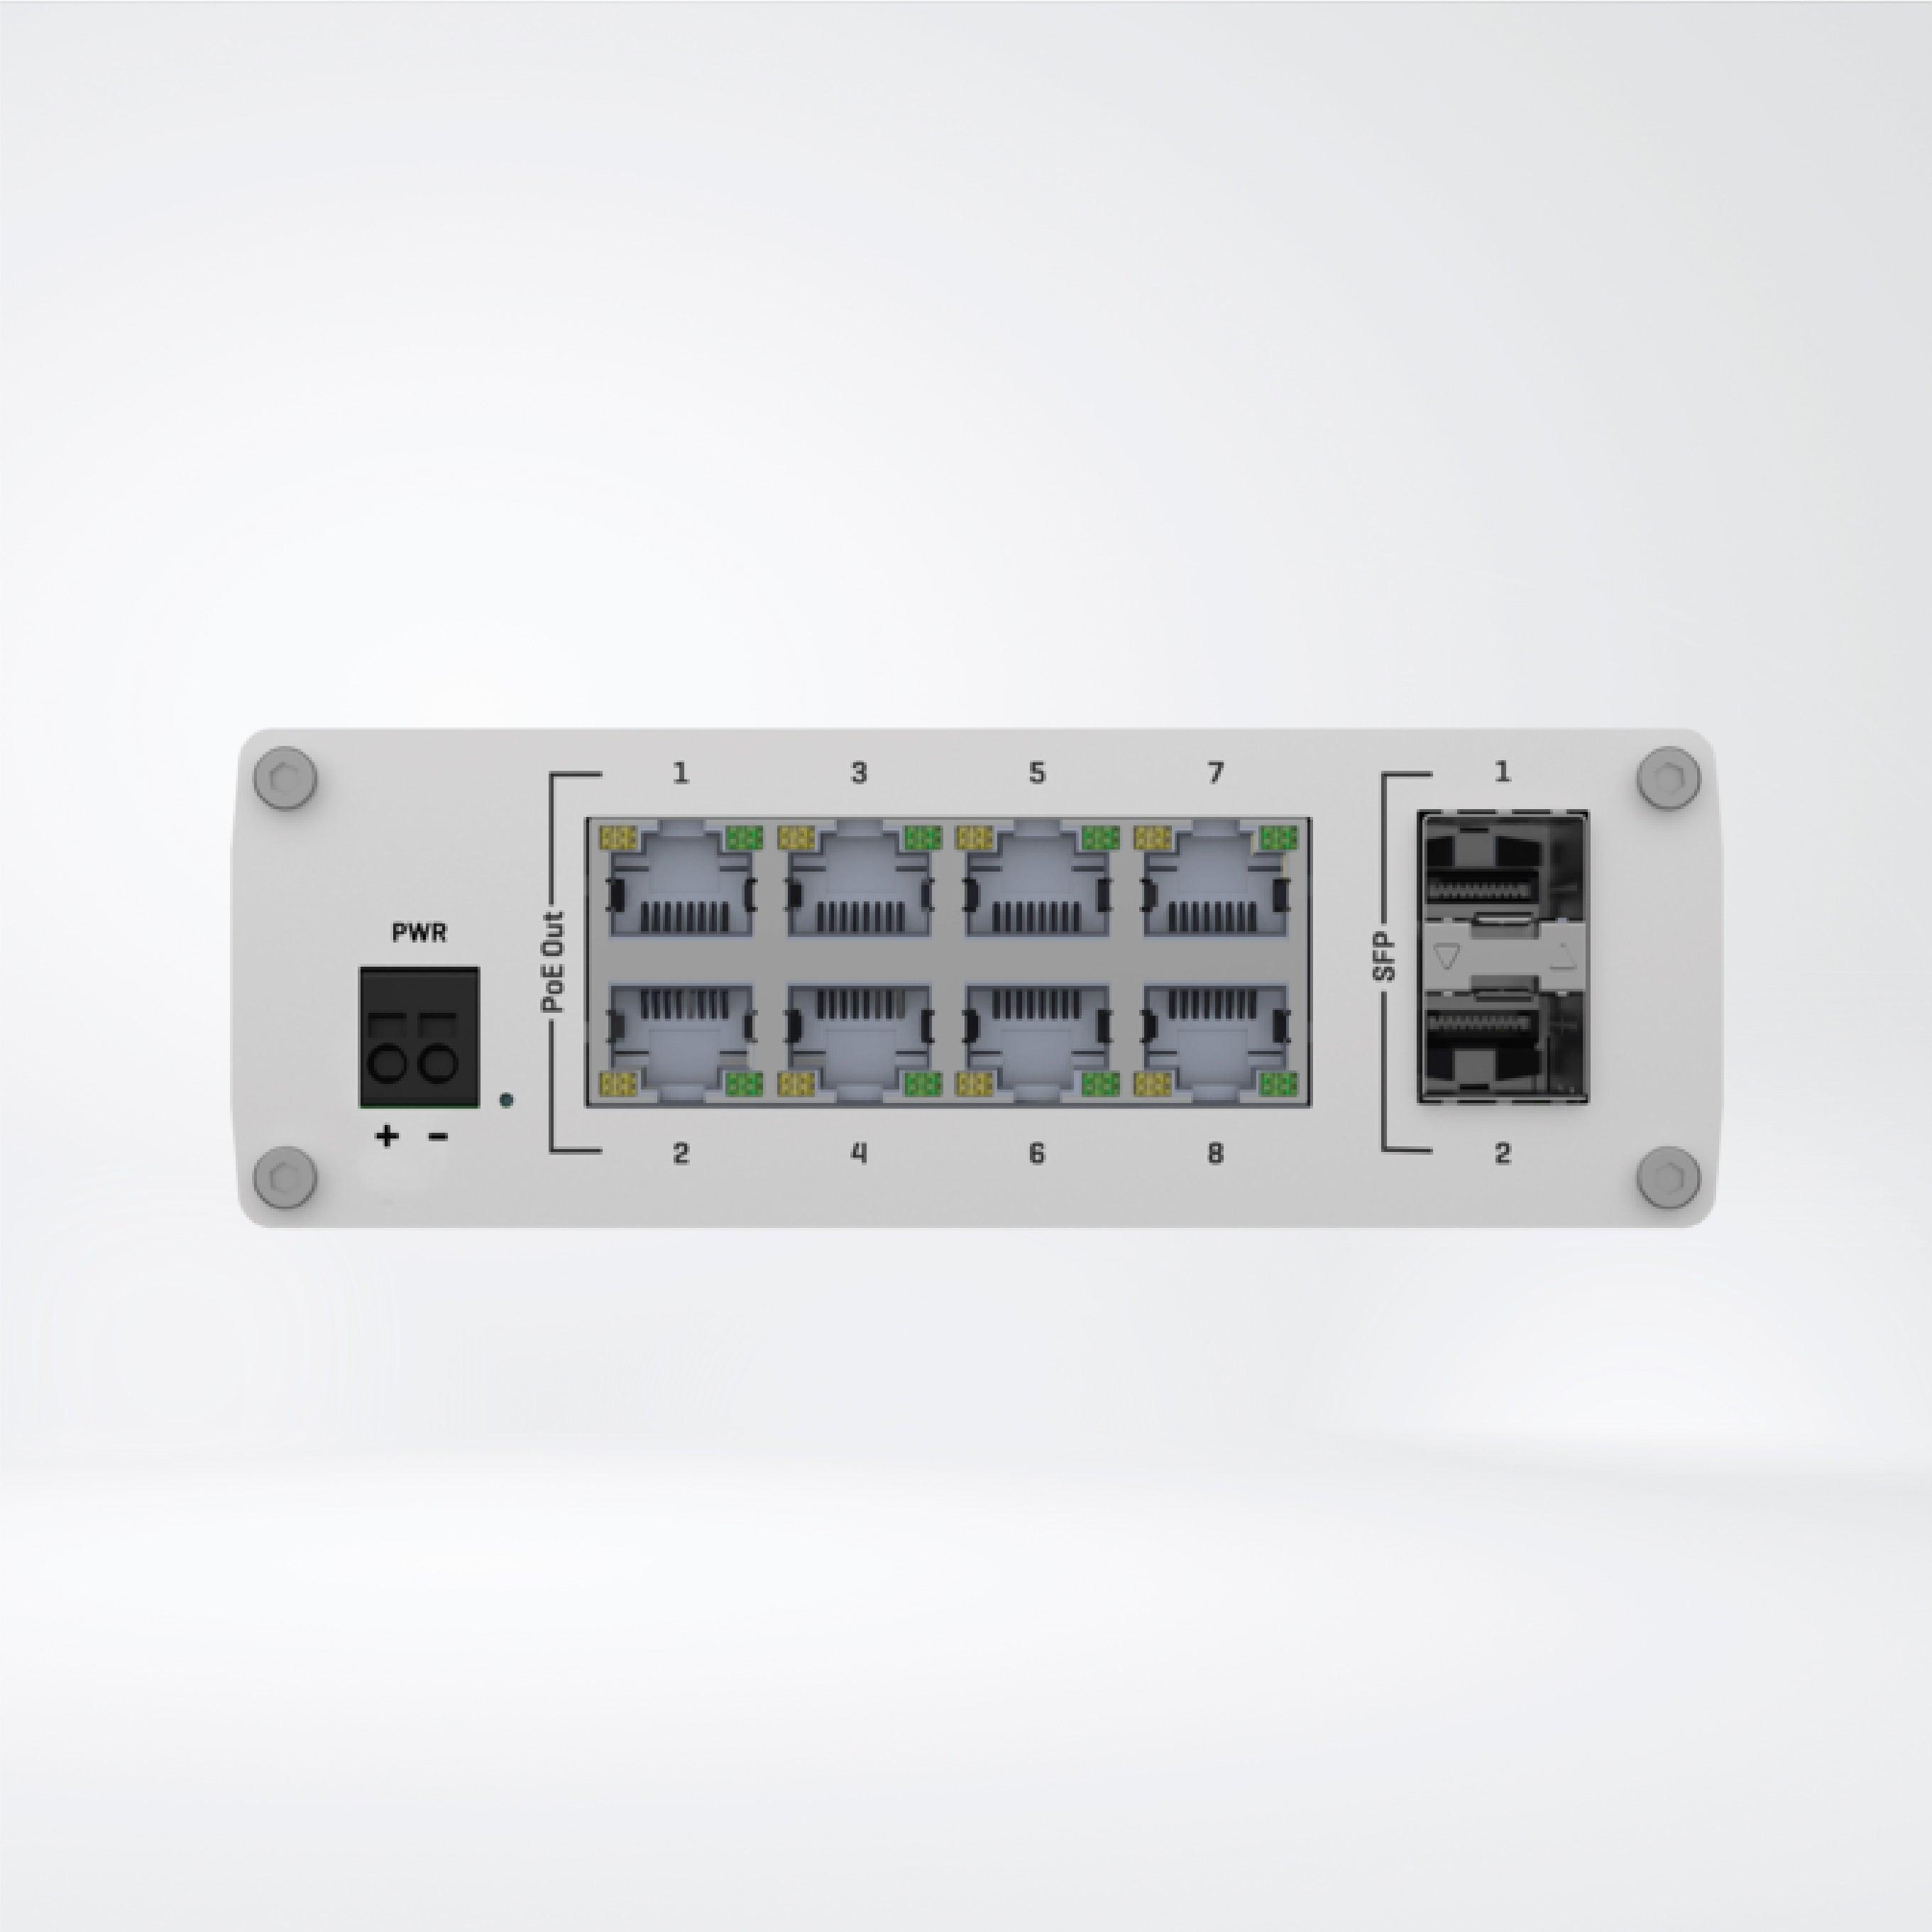 TSW200 unmanaged industrial switch with 2 SFP ports - Riverplus